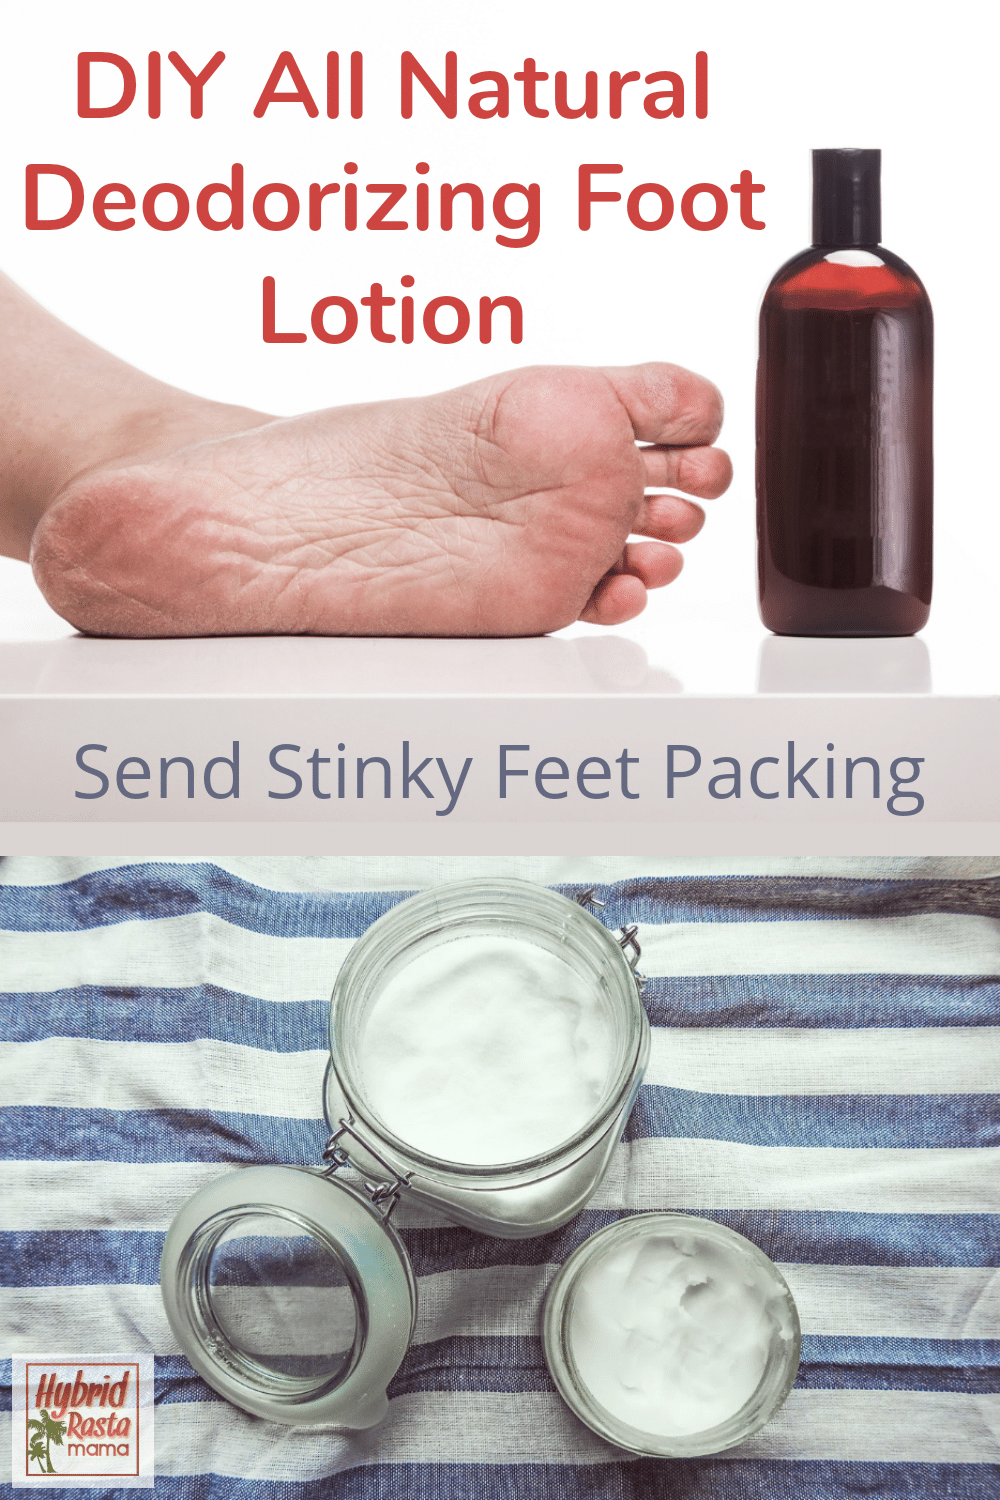 All natural foot odor lotion below a stinky foot